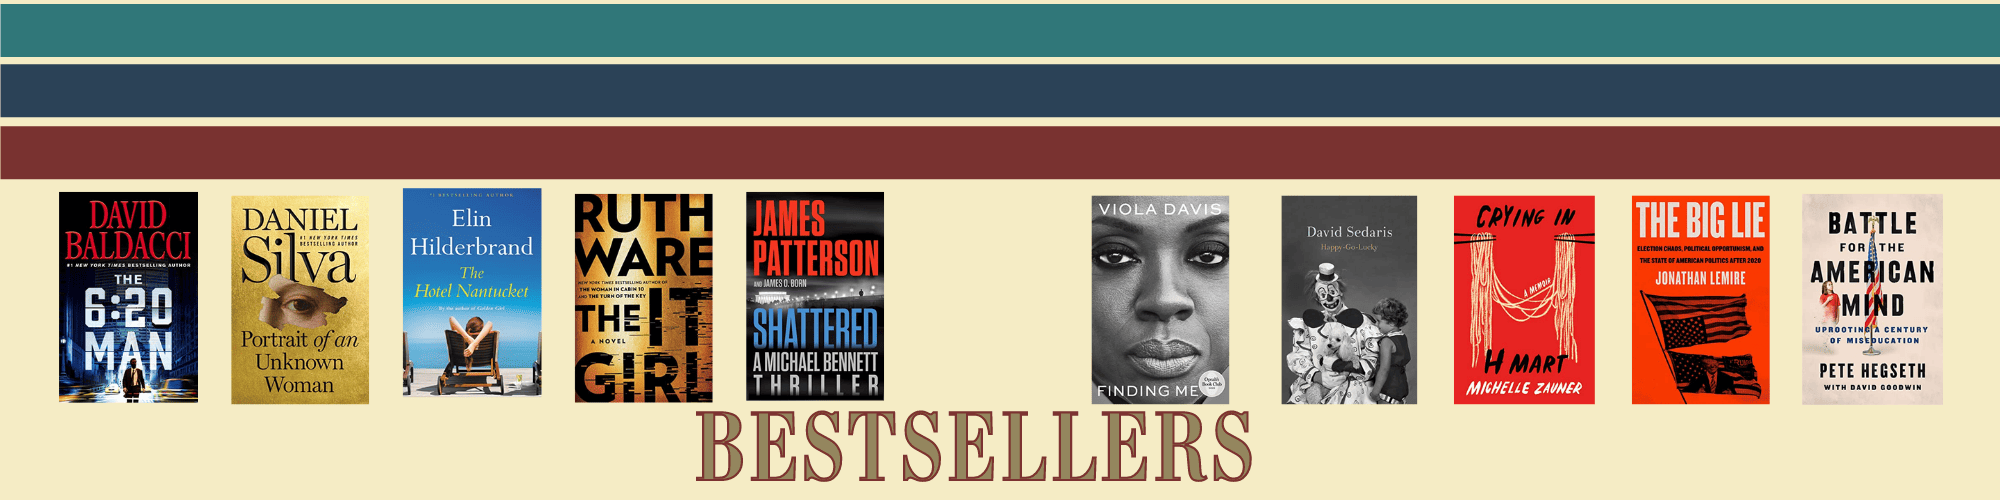 book covers of best sellers